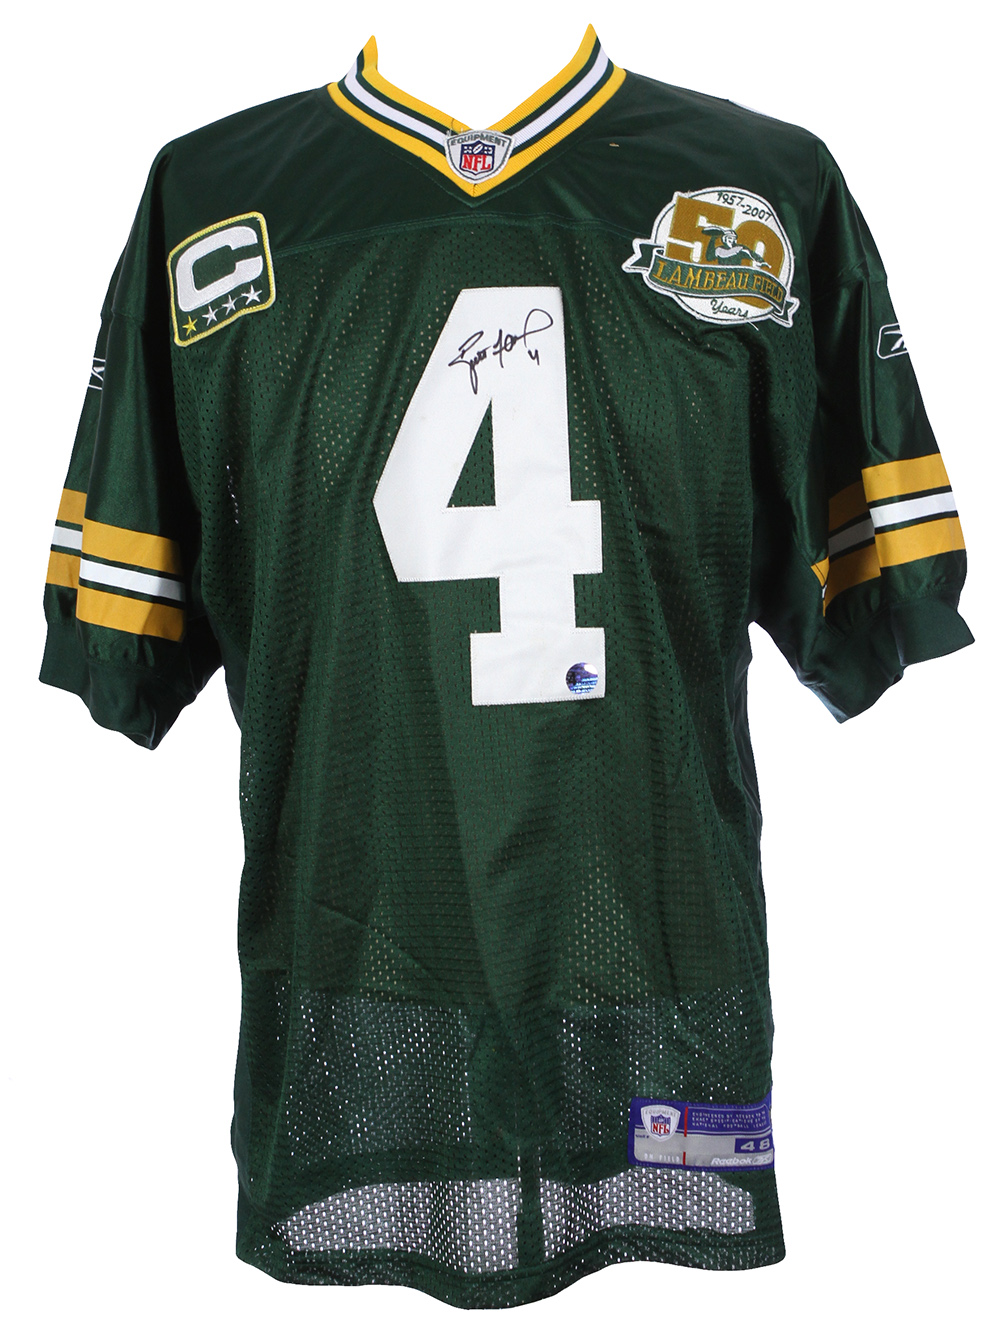 Captains patches are sewn to Packers jerseys